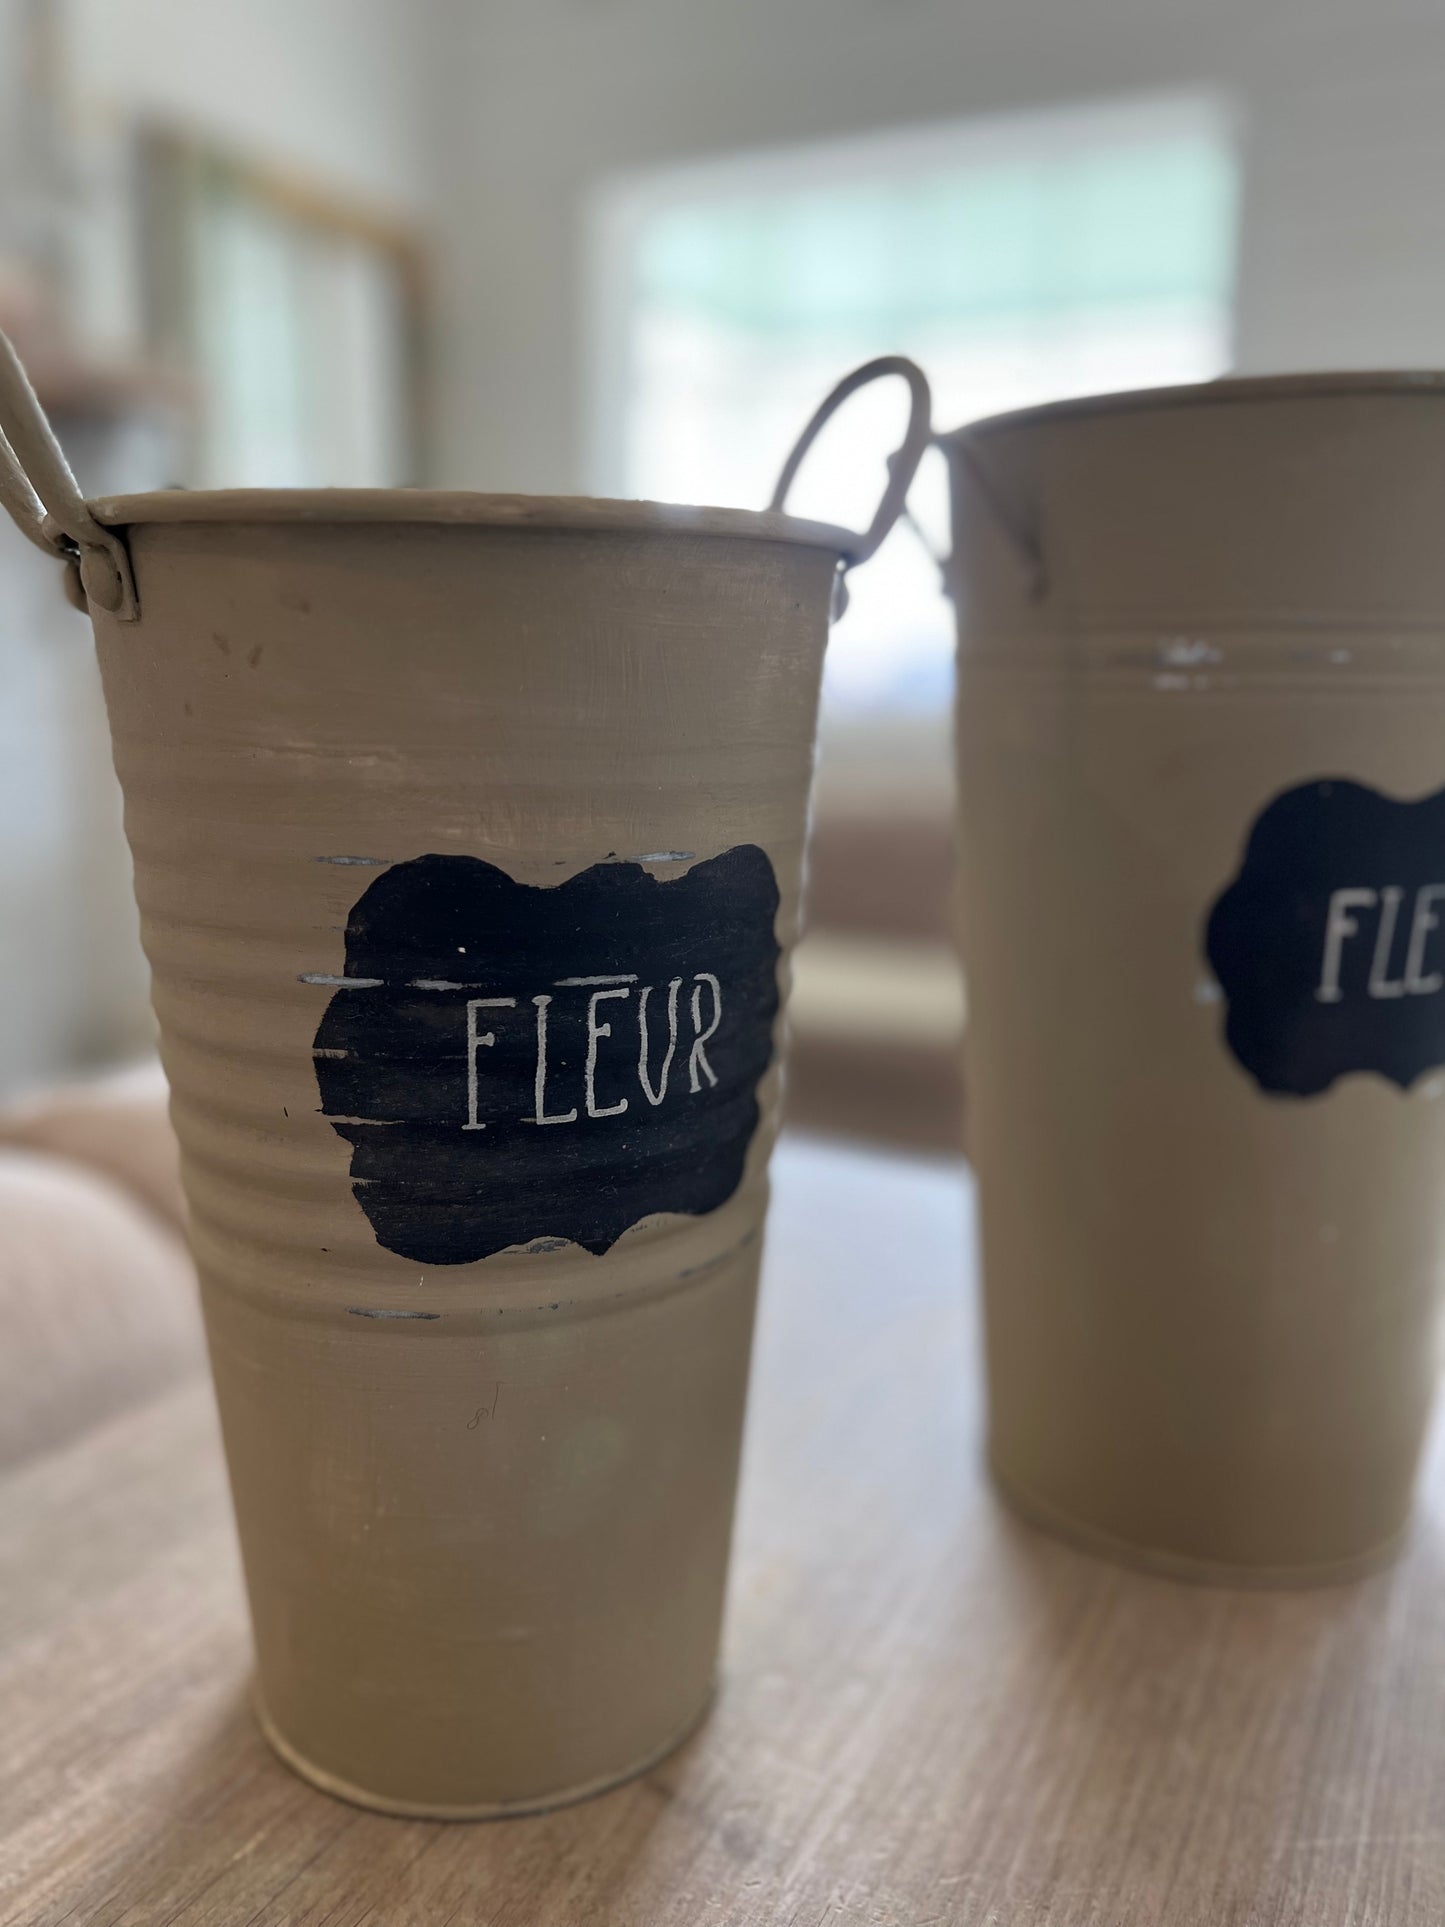 French style flower buckets